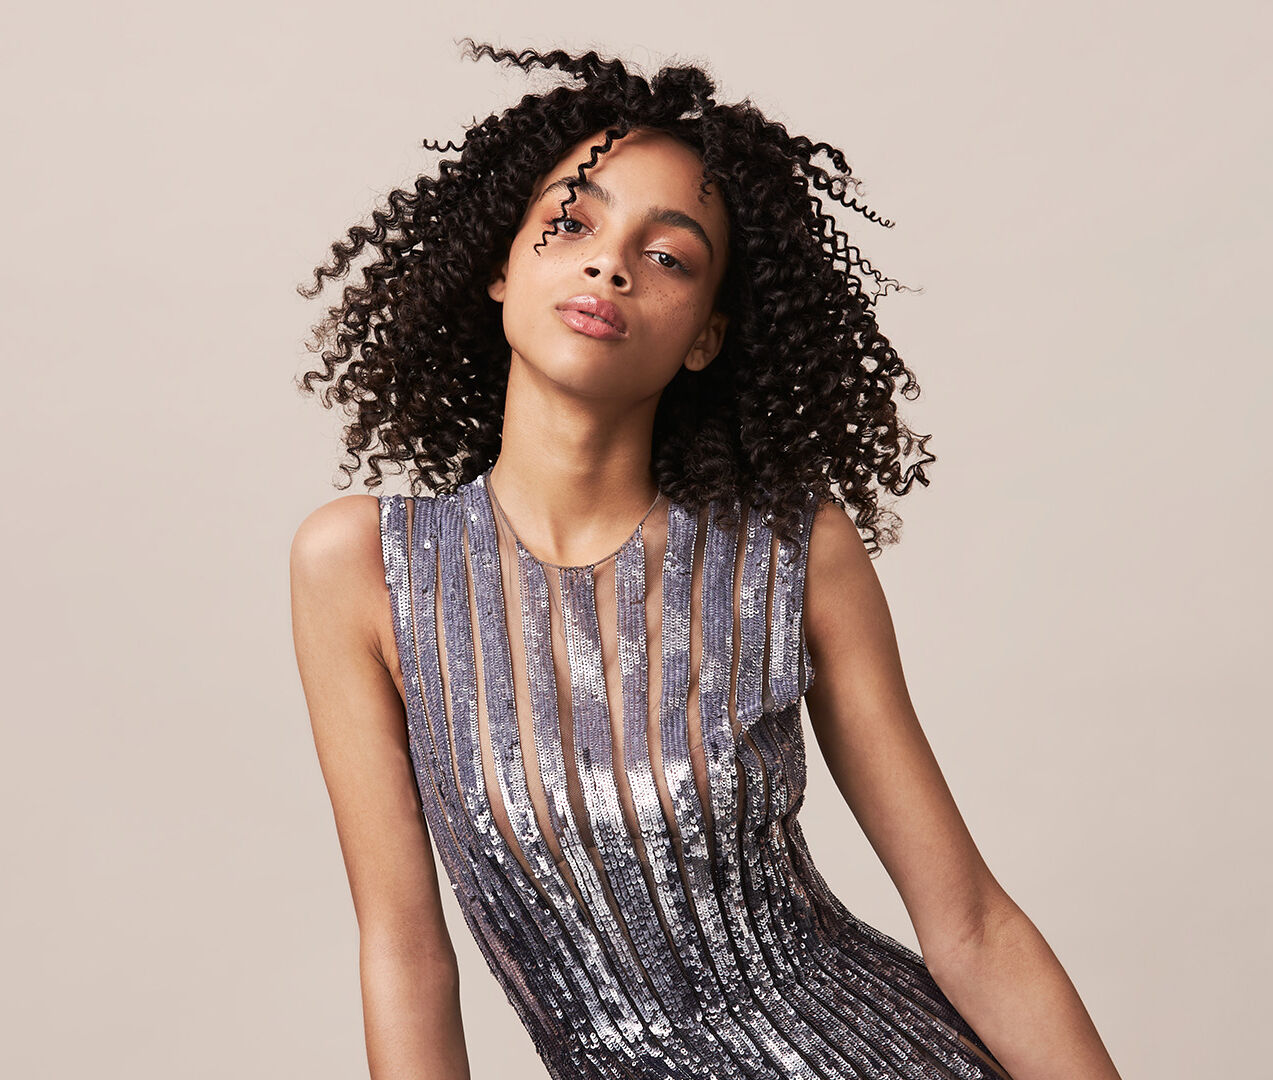 Glamorous look featuring curly hair and metallic dress